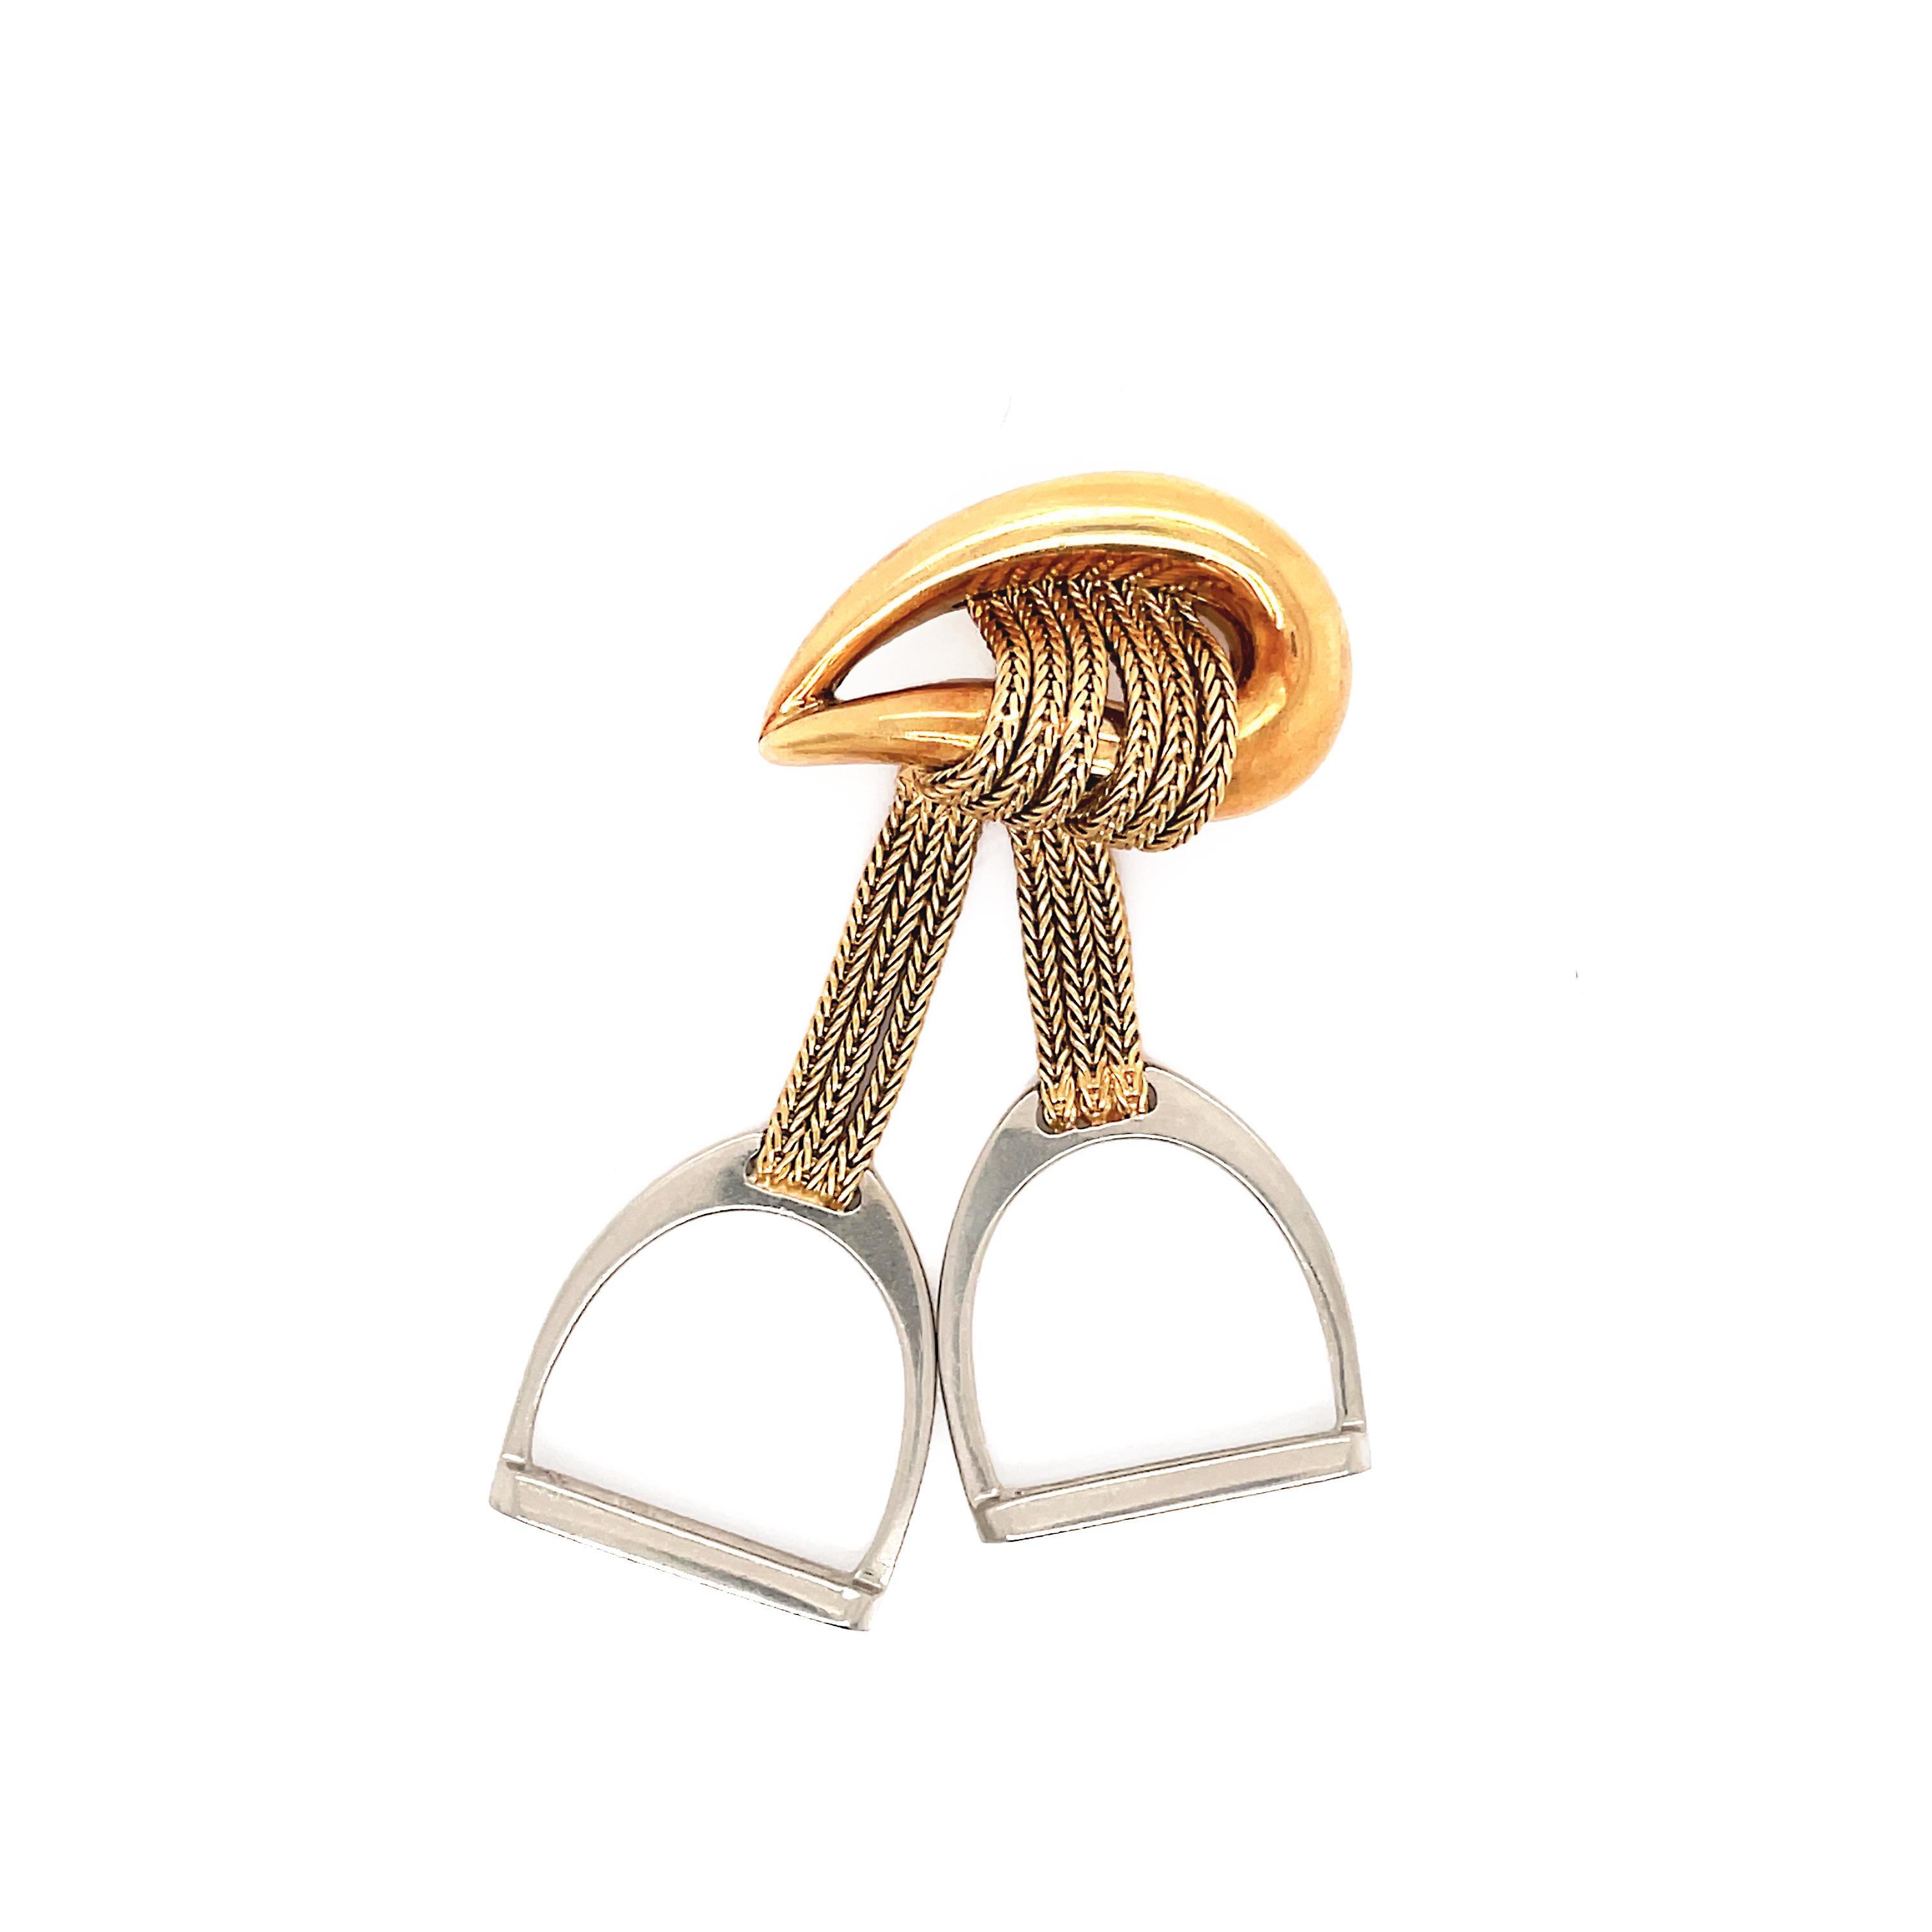 This rare vintage 18 carat gold HERMES brooch is a signature style of the French brands' equestrian design aesthetic. Hanging from a teardrop shaped brooch are two strands of yellow gold chain holding onto two solid white gold stirrups. The piece is